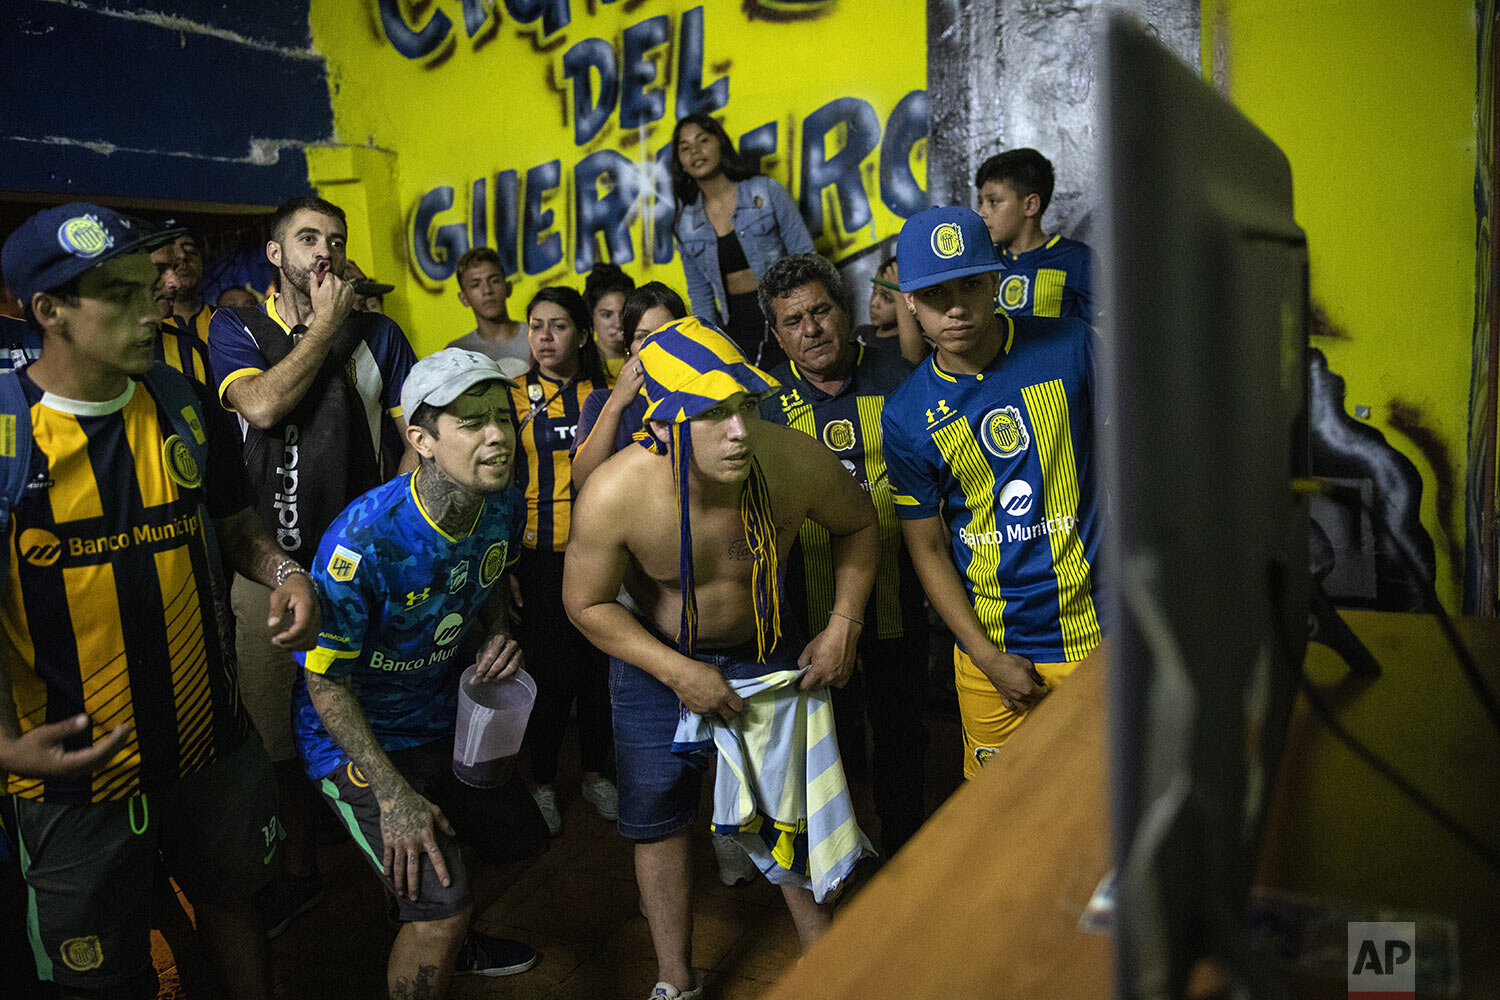  Rosario Central soccer fan club members of "Defensores de Tablada" watch their team's match against Newell's Old Boys on a home's back porch while fans are banned from attending games in person in Rosario, Argentina, May 2, 2021. (AP Photo/Rodrigo A